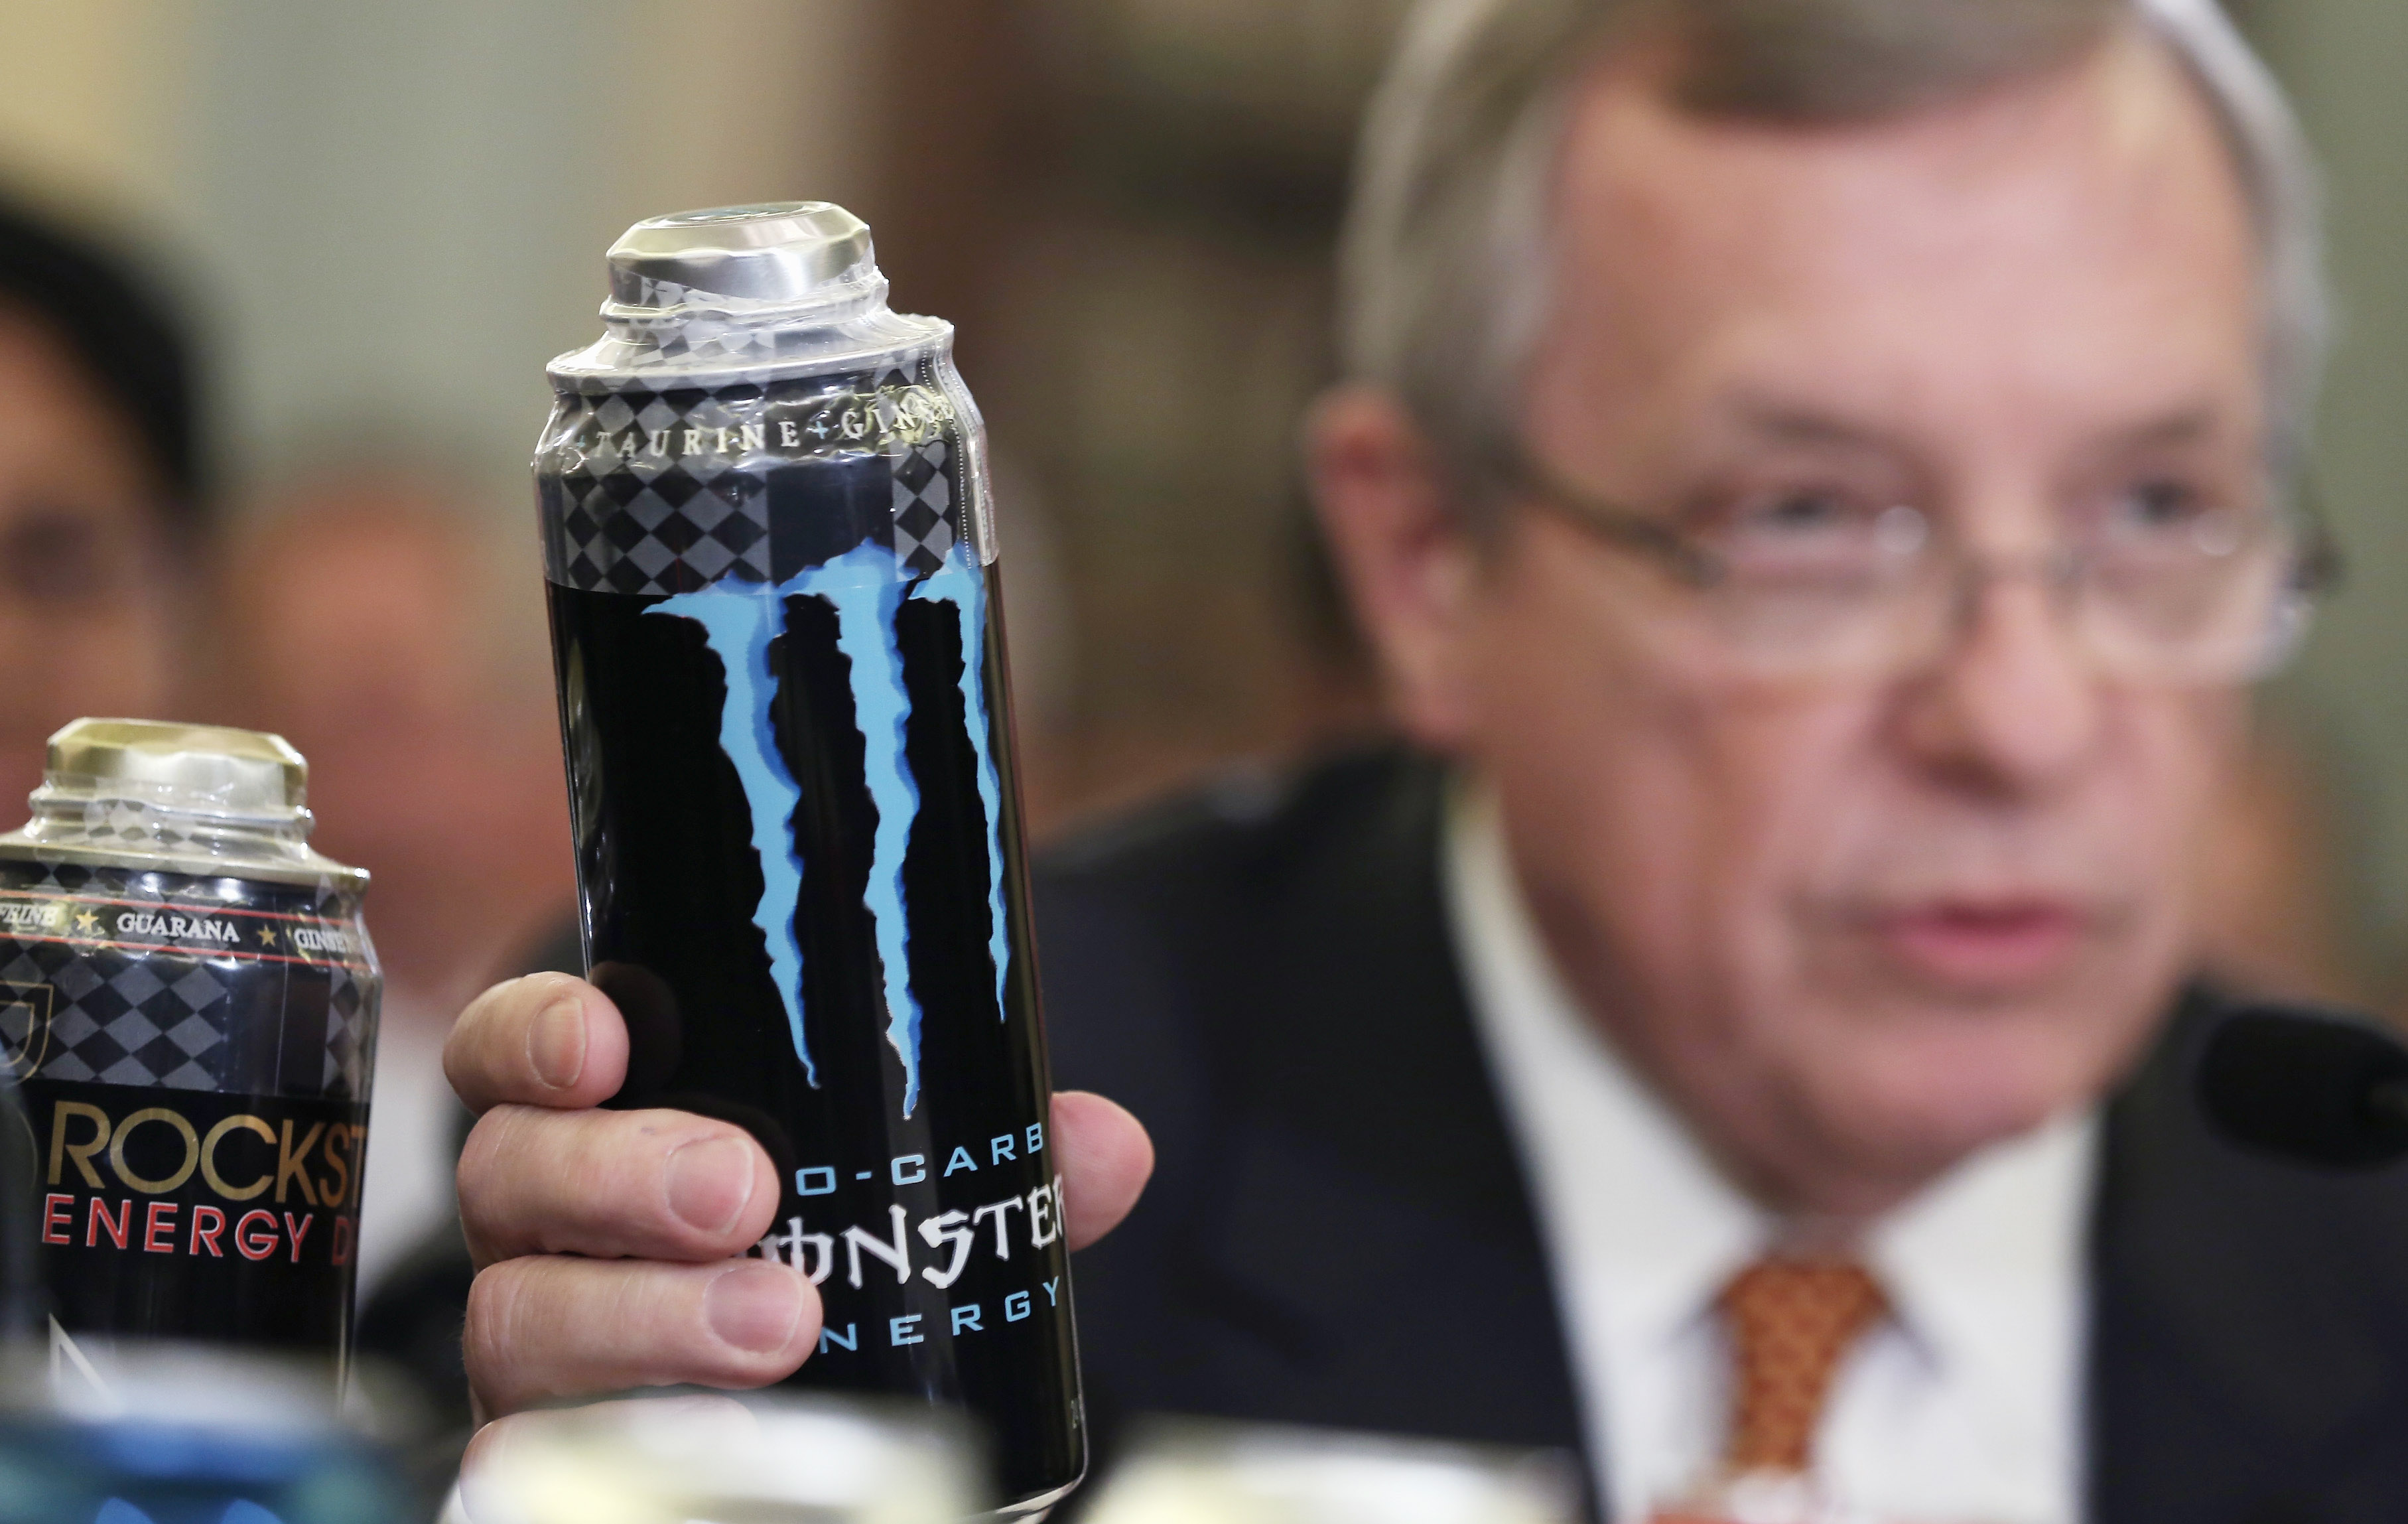 U.S. Senate Majority Whip Sen. Richard Durbin (D-IL) holds up a can of Monster energy drink as he testifies during a hearing before the Senate Commerce, Science and Transportation Committee July 31, 2013 on Capitol Hill in Washington, DC. (Joe Raedle&mdash;Getty Images)